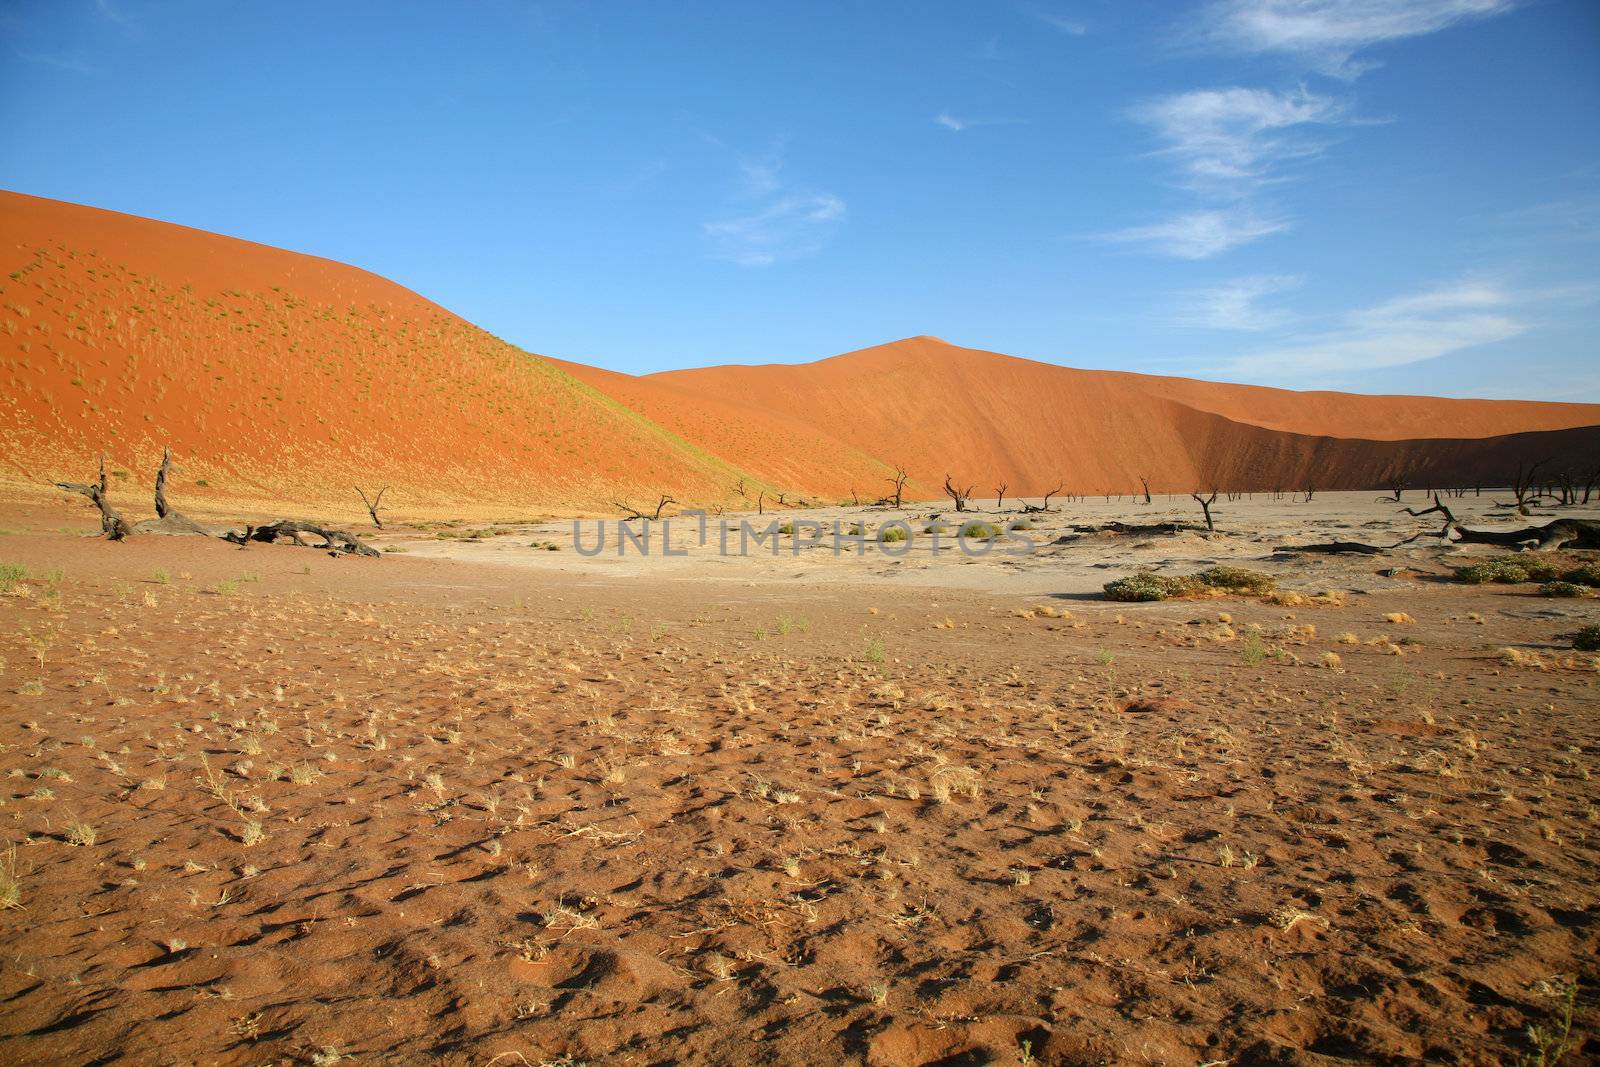 Dune sea of the Namib desert during a hot day wity blue sky
